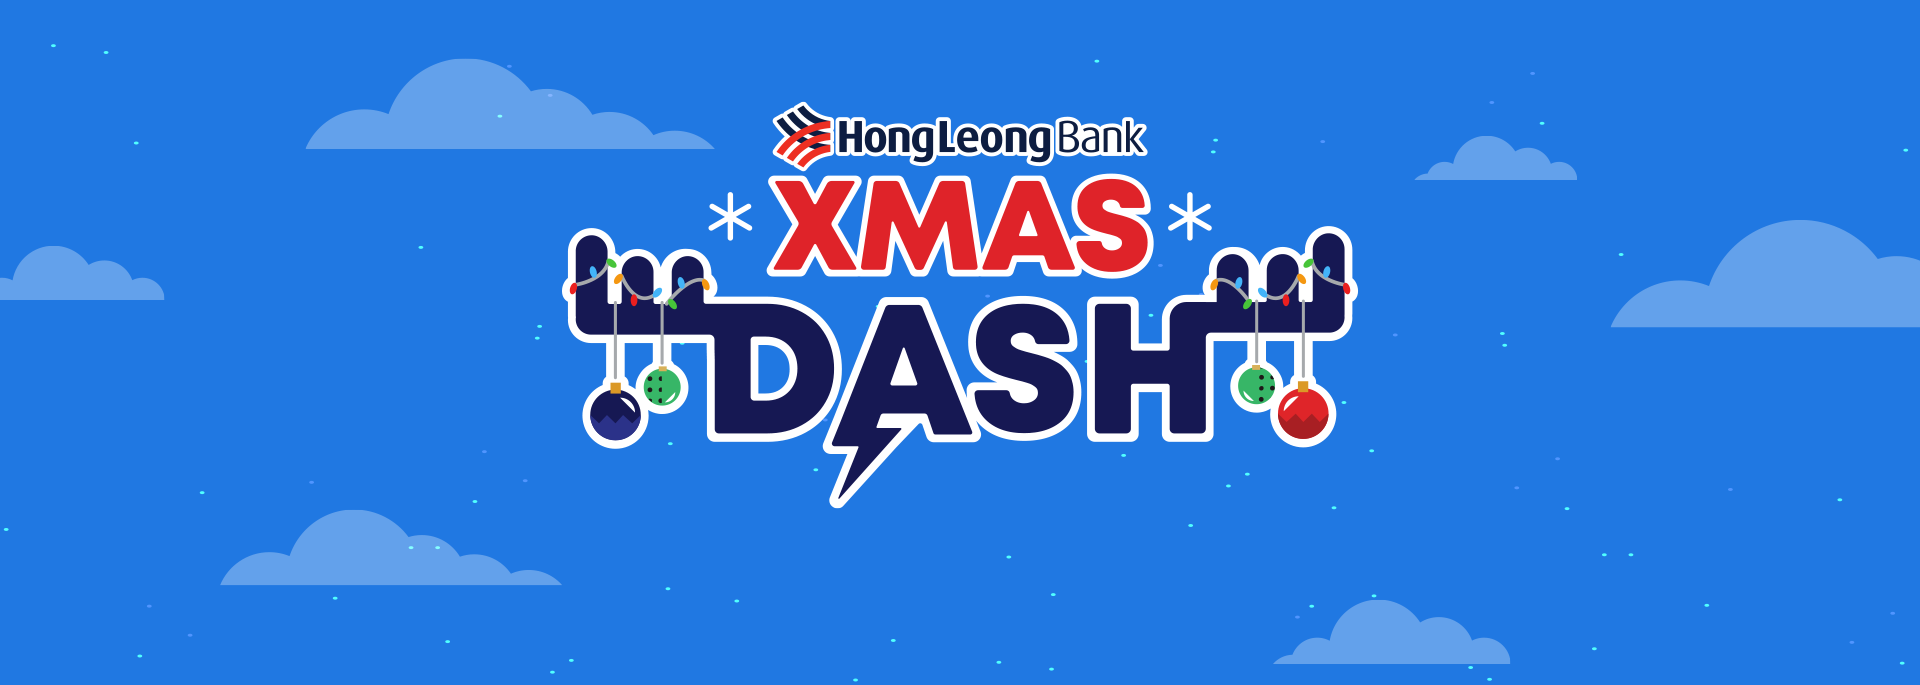 2022 Hong Leong Bank Xmas Dash Contest Terms And Conditions